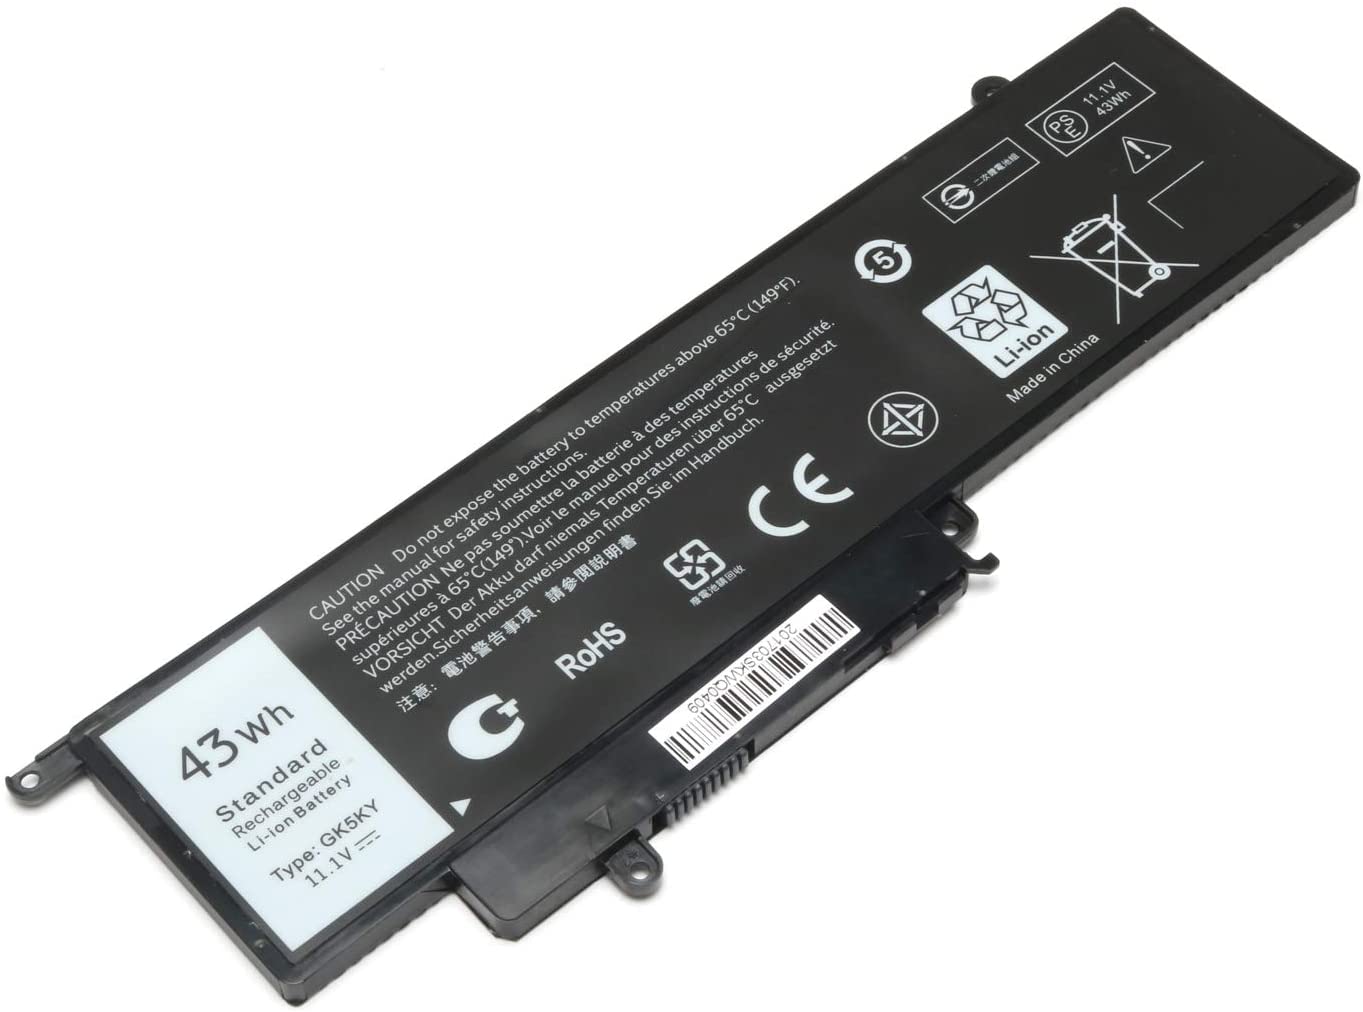 GK5KY Laptop Battery Replacement for Inspiron 11 3000 3147 3148 3152 13 7000 7353 7352 7347 7348 7359 7558 7568 Series; GK5KY 04K8YH 092NCT 92NCT 4K8YH P20T